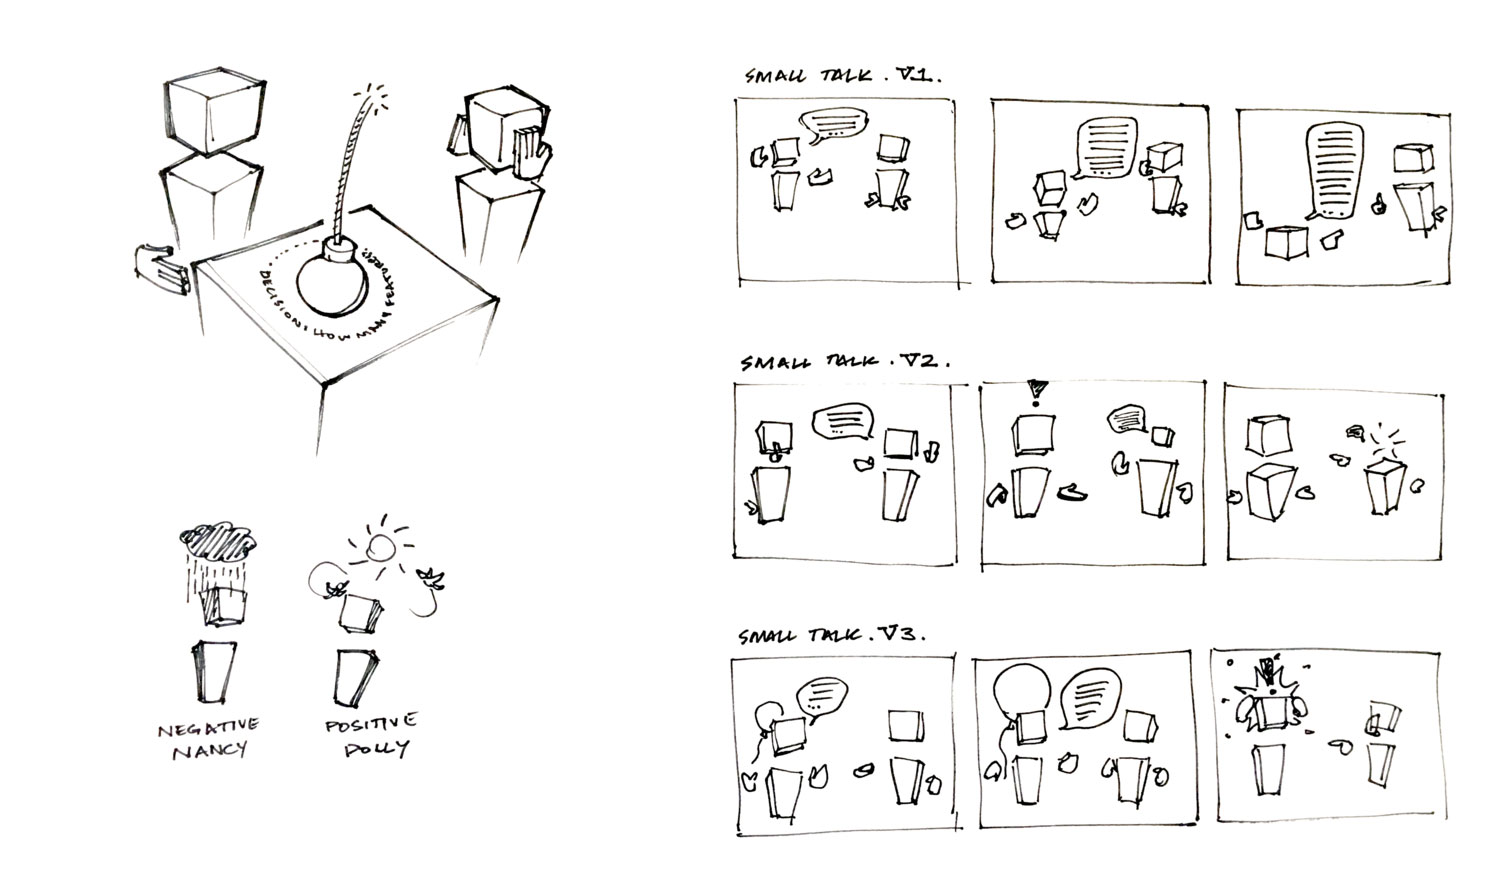 My sketches exploring VR interactions